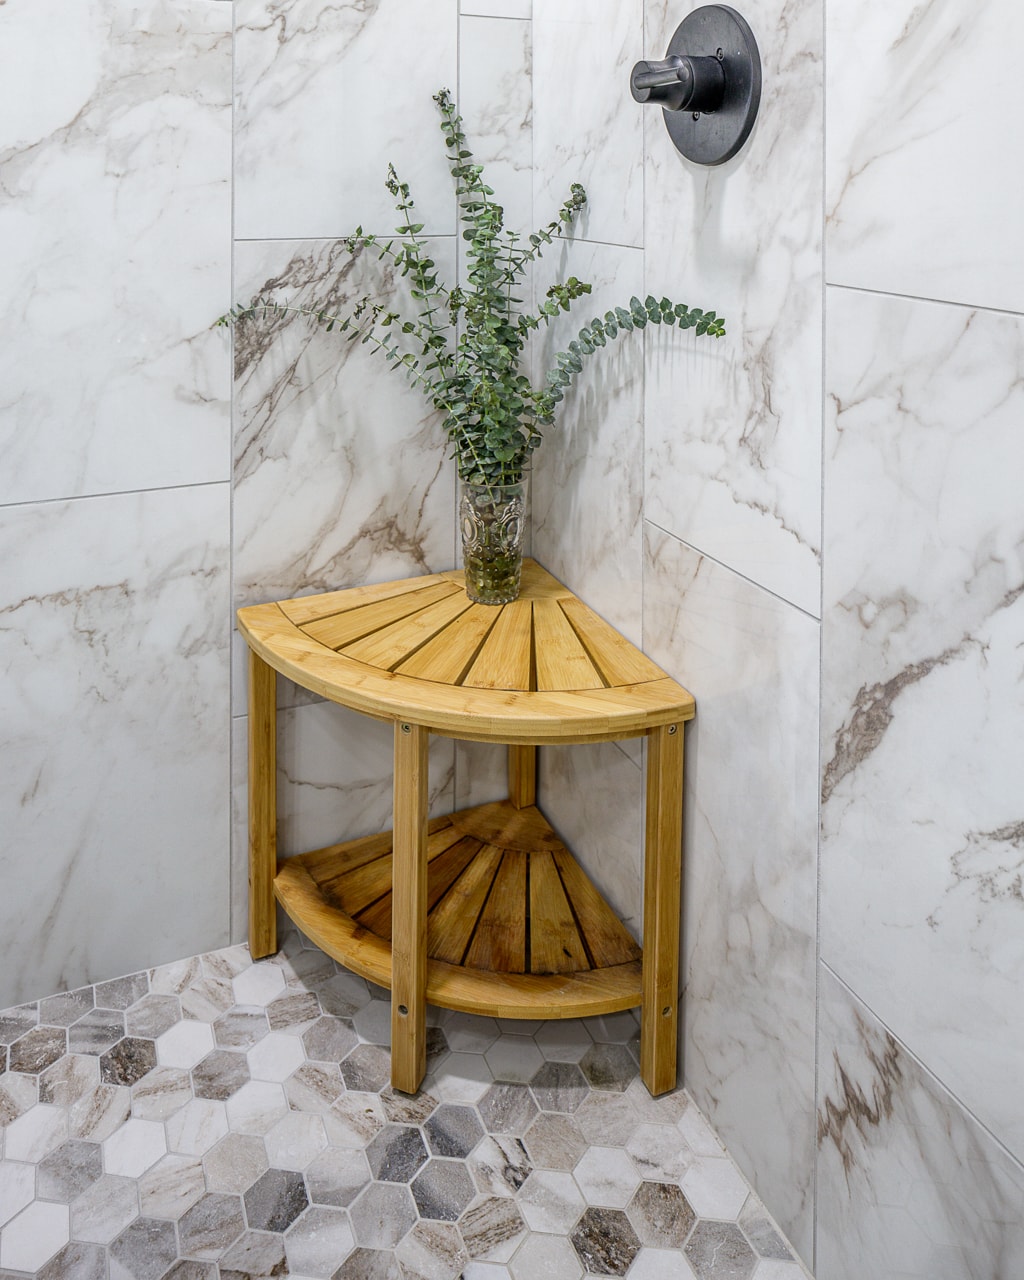 A bathroom remodel featuring a wooden shower bench and a potted plant.